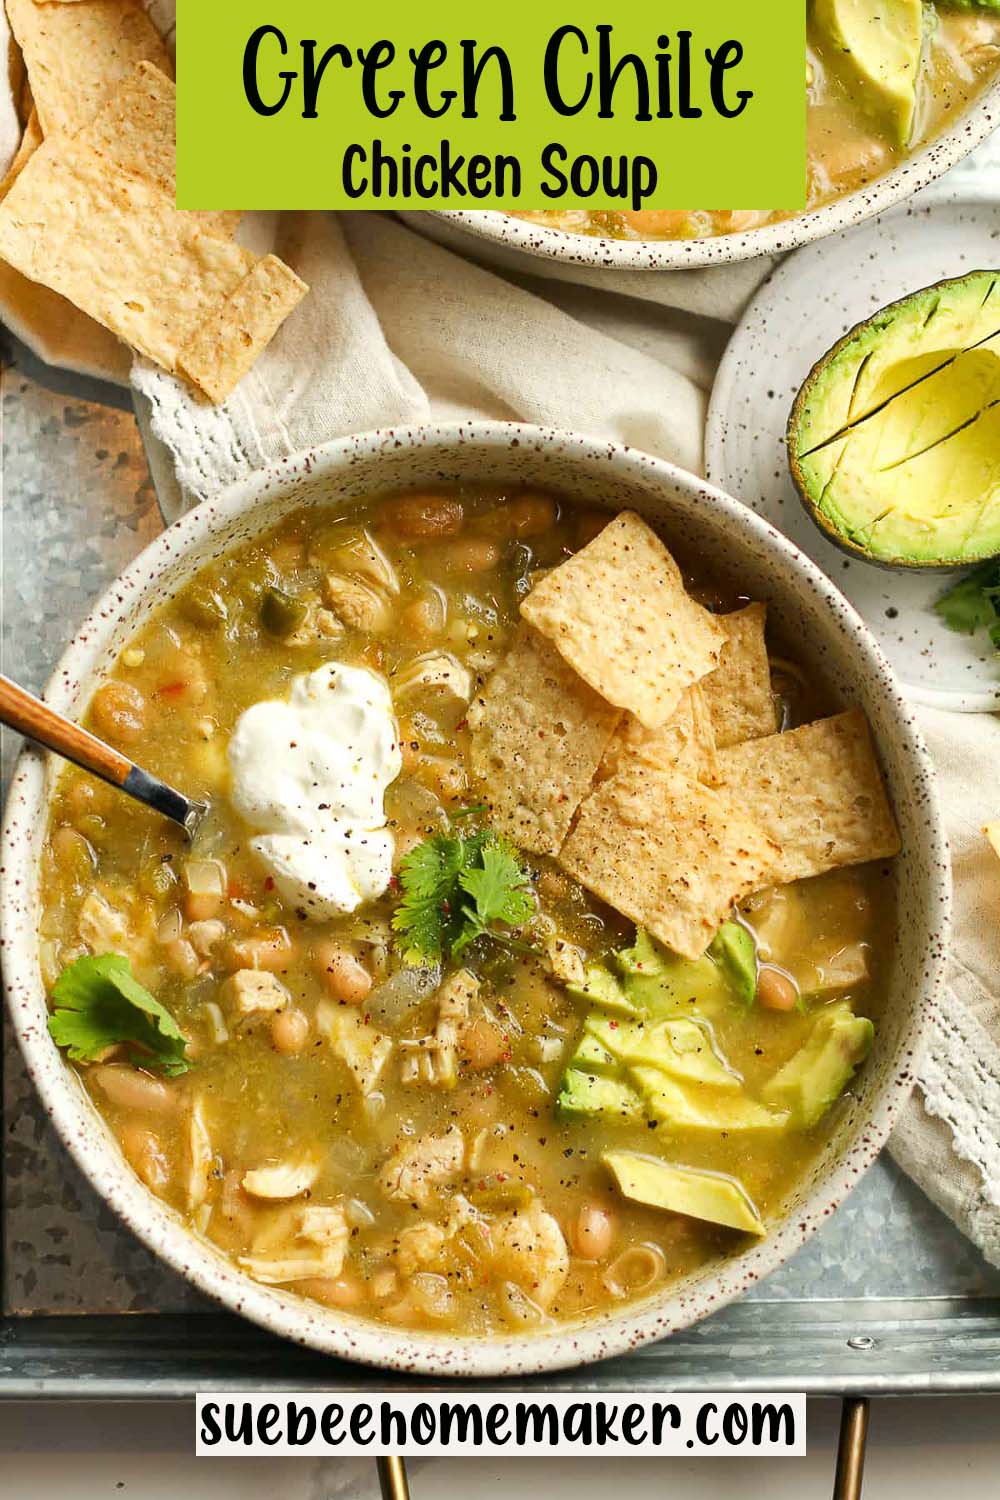 A bowl of green Chile chicken soup with tortilla chips.